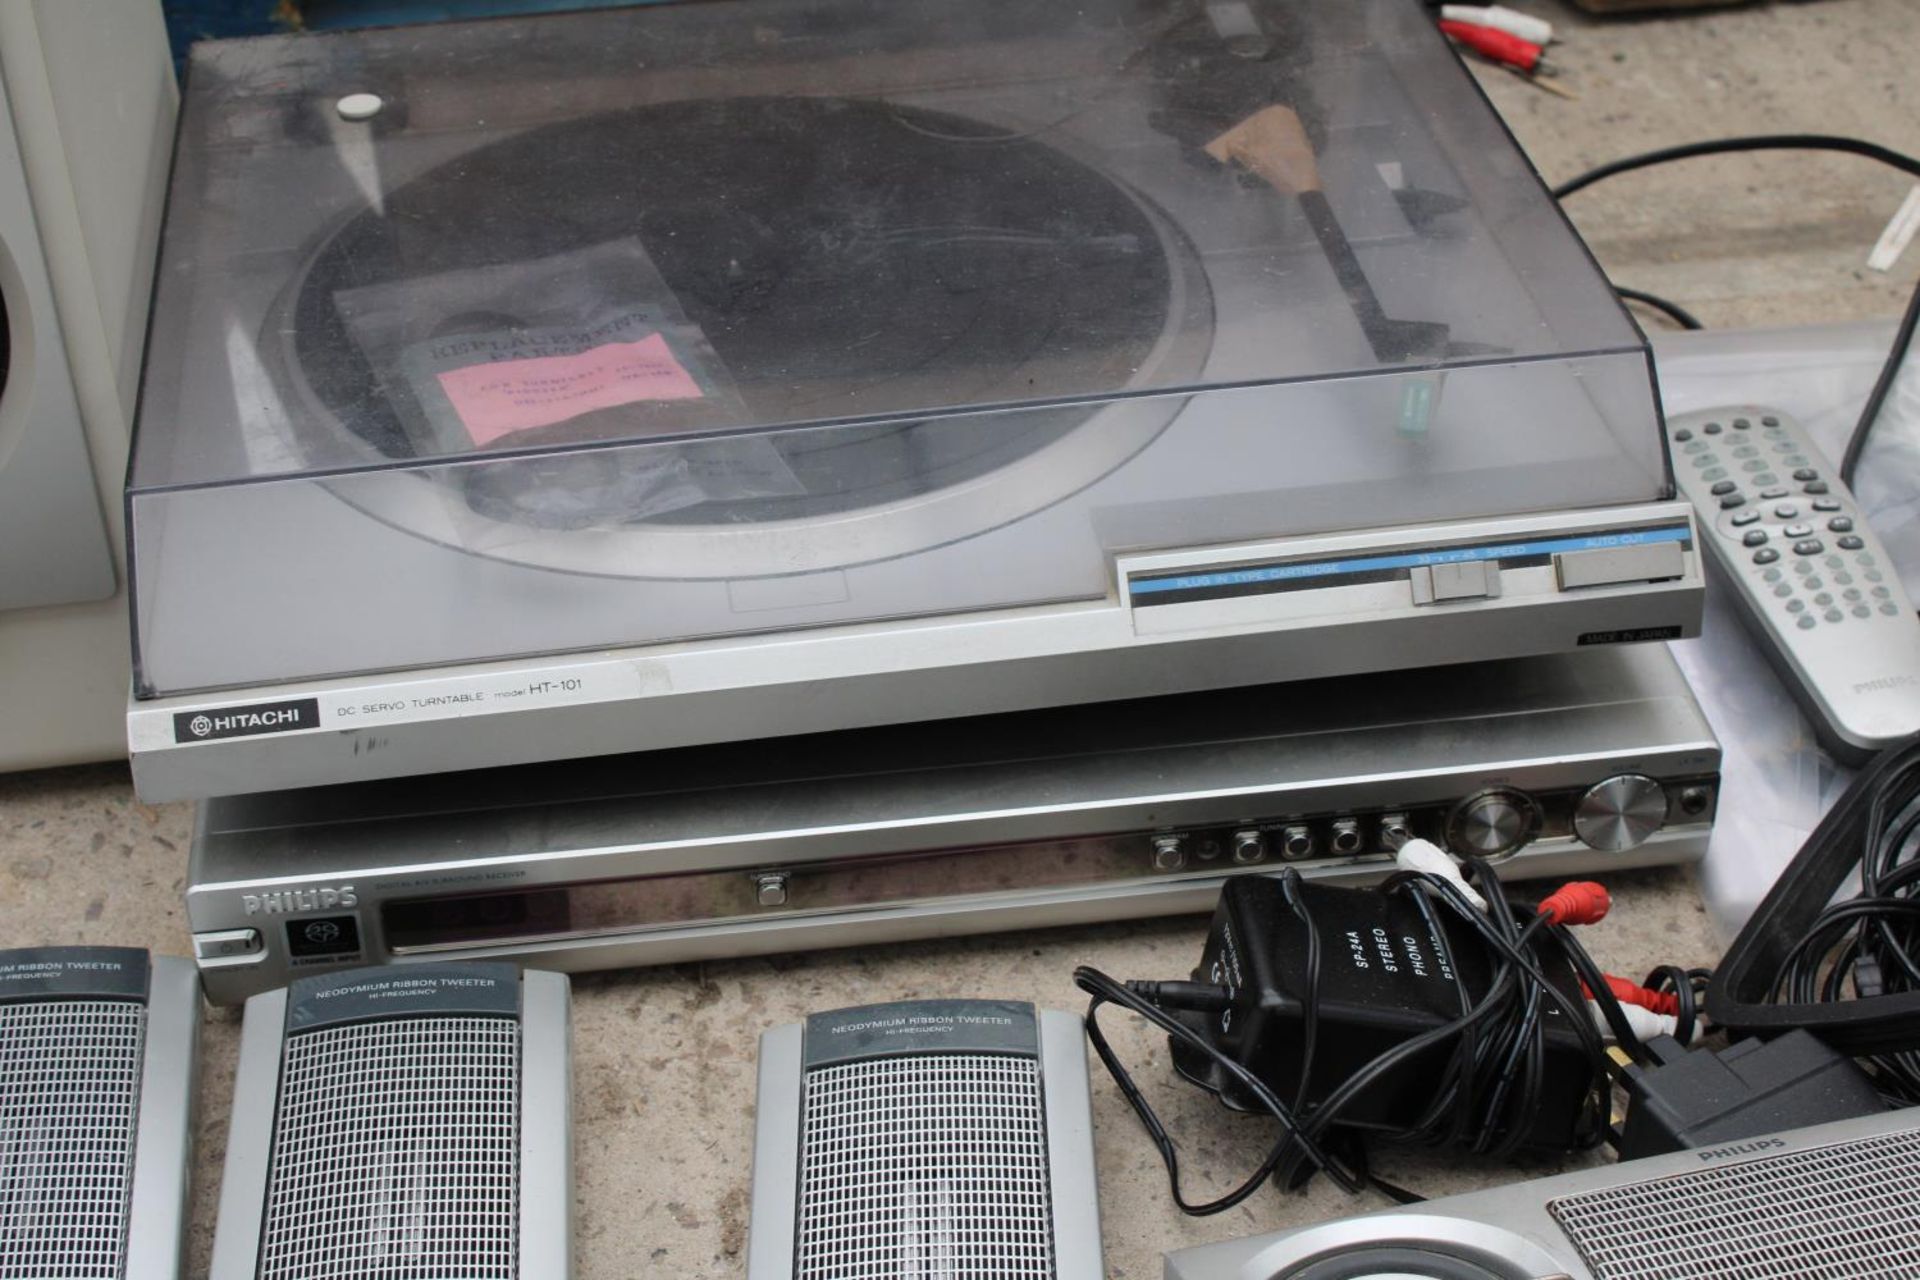 A PHILIPS DIOGITAL SOUND RECIEVER, AN HITACHI RECORD PLAYER AND SIX PHILIPS SPEAKERS ETC - Image 2 of 3